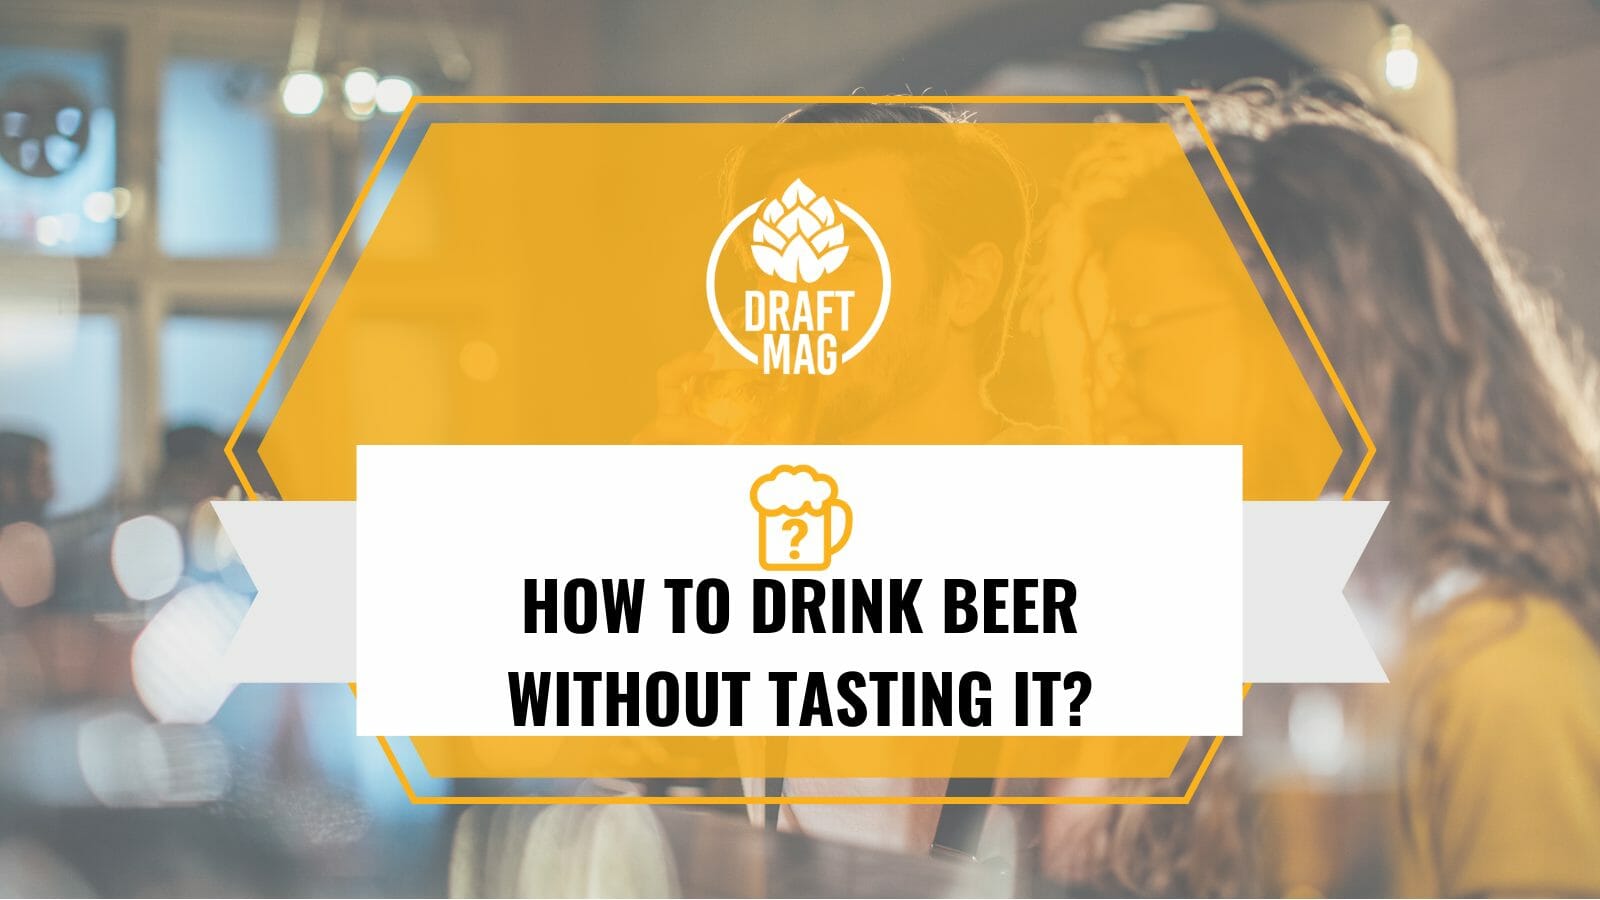 How to drink beer without tasting it